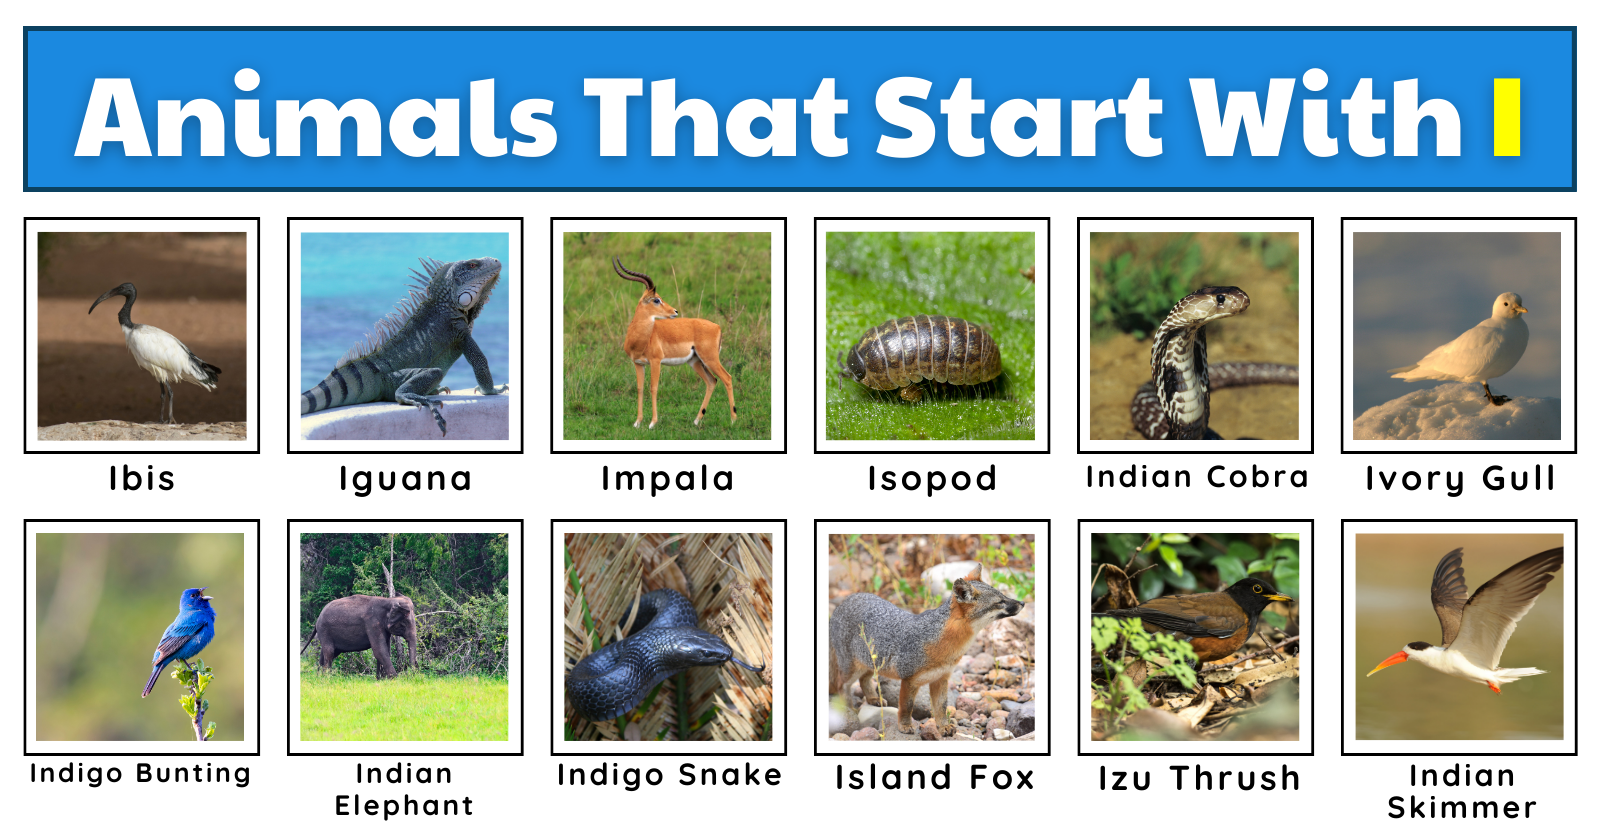 50 Incredible Animals That Start With I | List, Fun Facts, And A Worksheet  | Games4esl